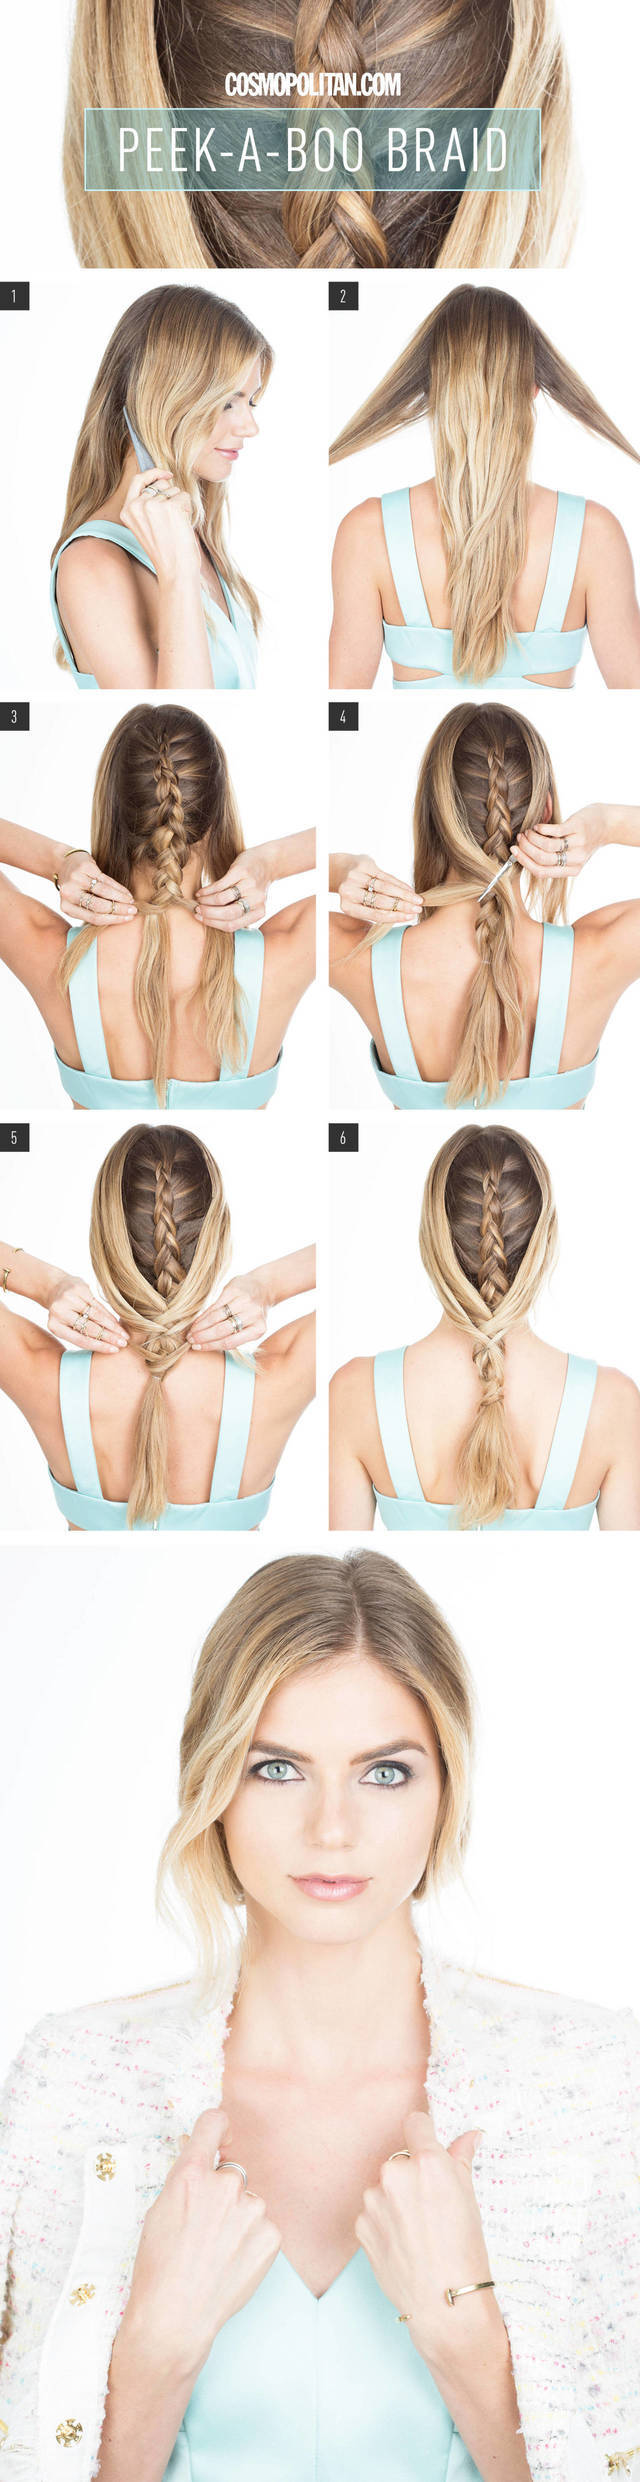 https://image.sistacafe.com/images/uploads/content_image/image/13441/1435318101-nrm_1411414412-cosmo-infographic-peek-a-boo-braid.jpeg